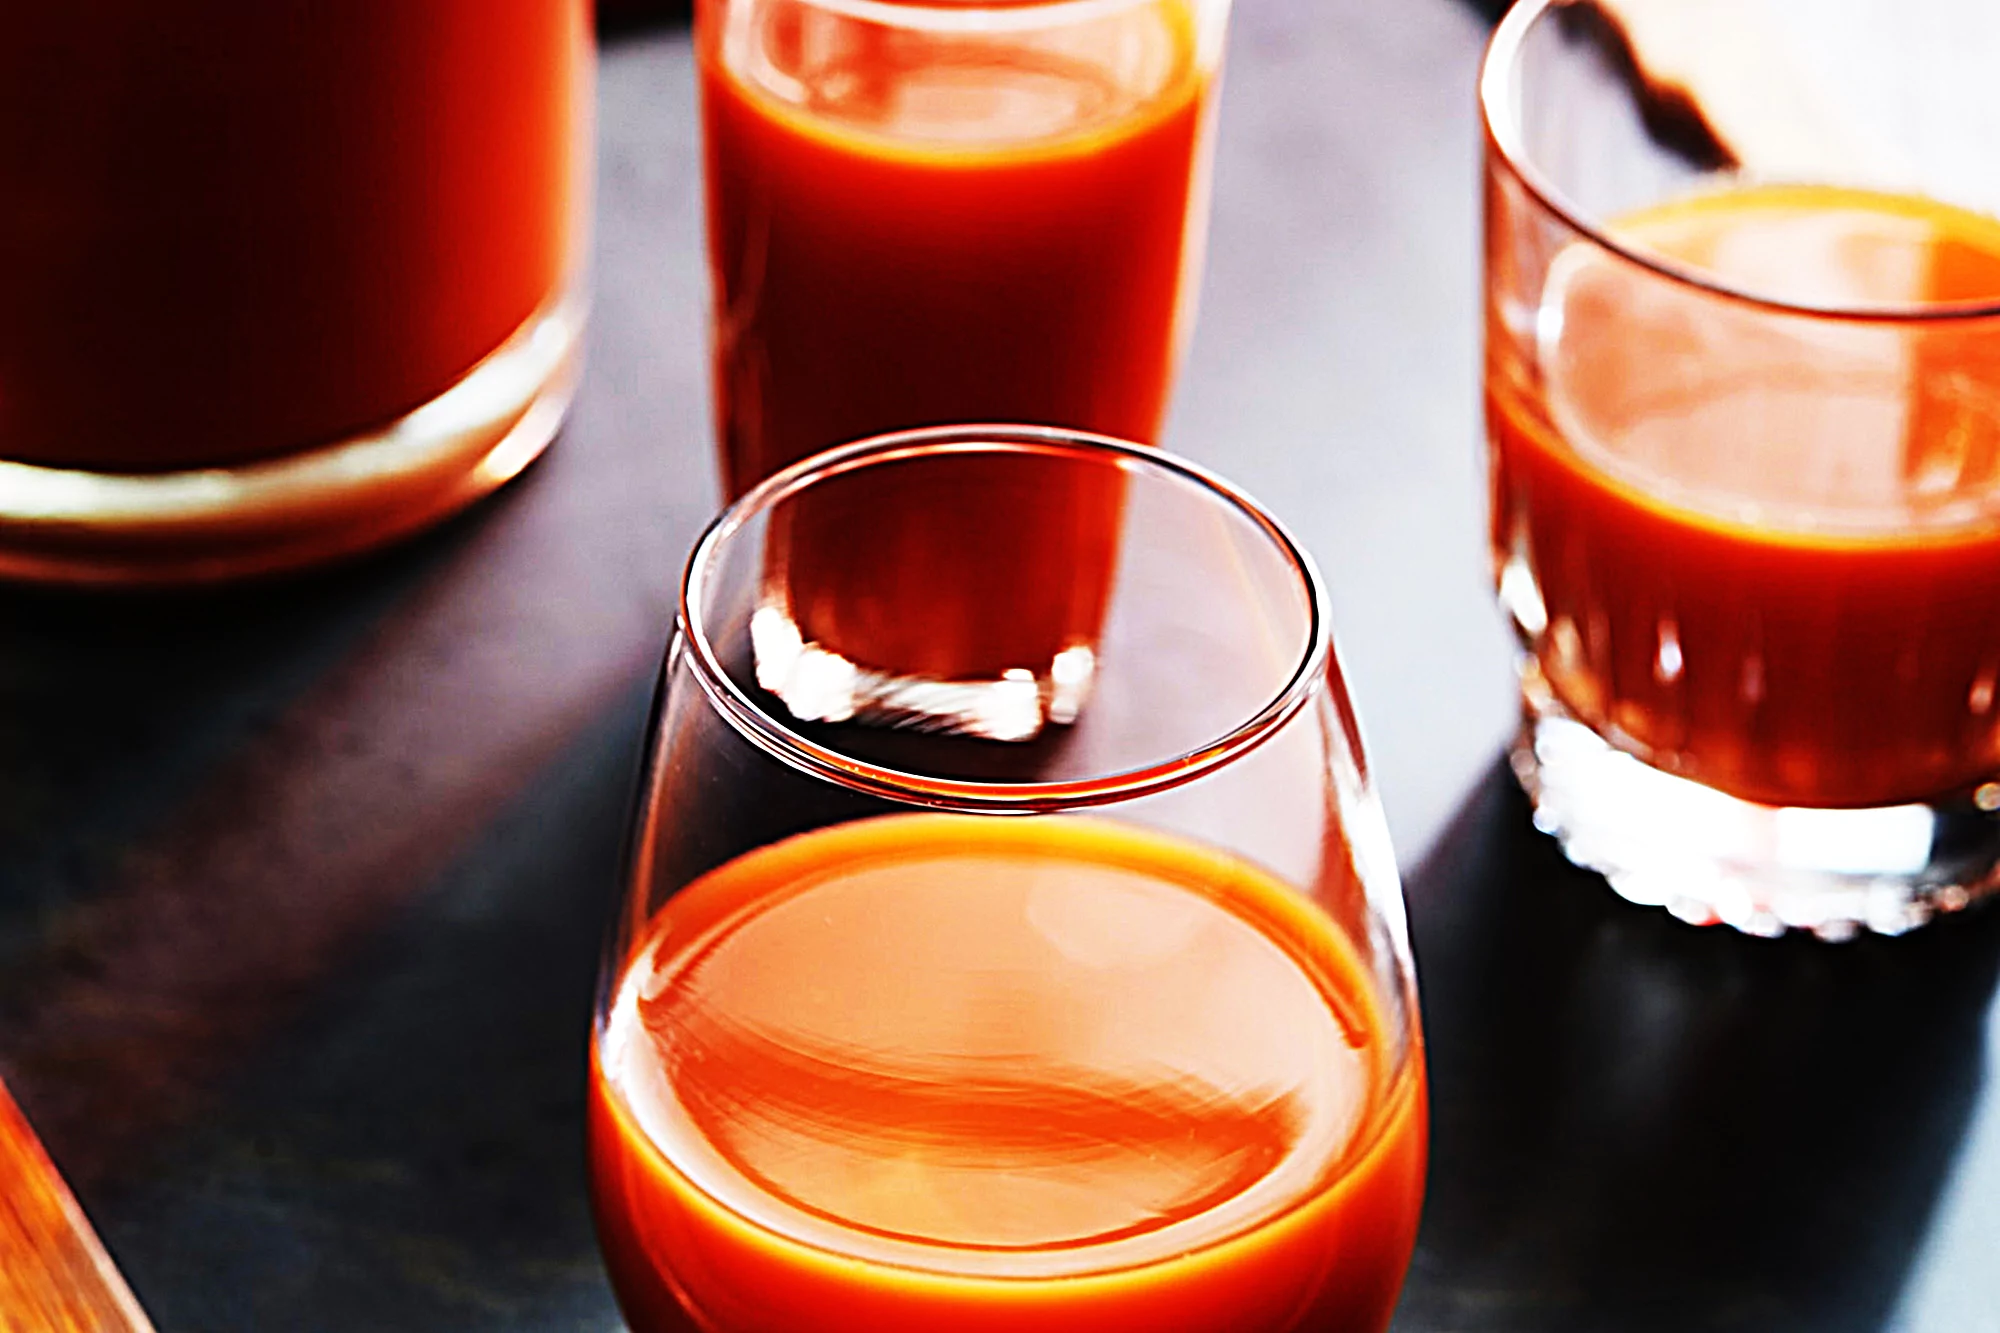 Stupid-Easy Recipe for Carrot Ginger Elixer (#1 Top-Rated)